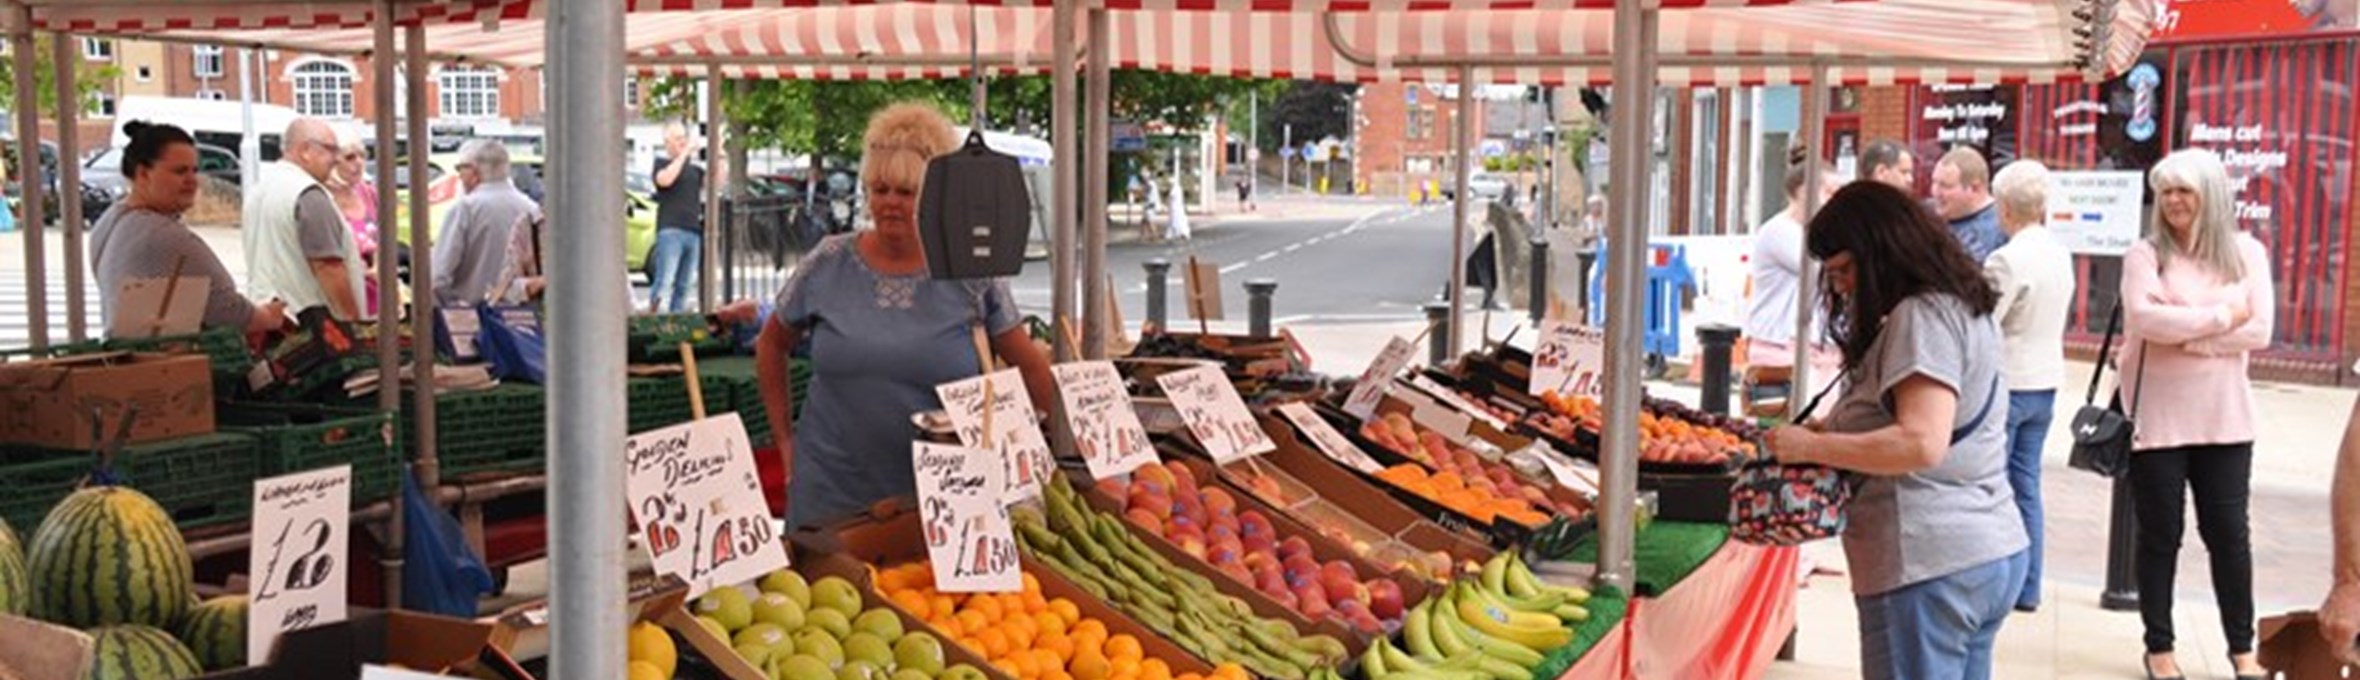 Fruit and veg market stall with people shopping in Hucknall